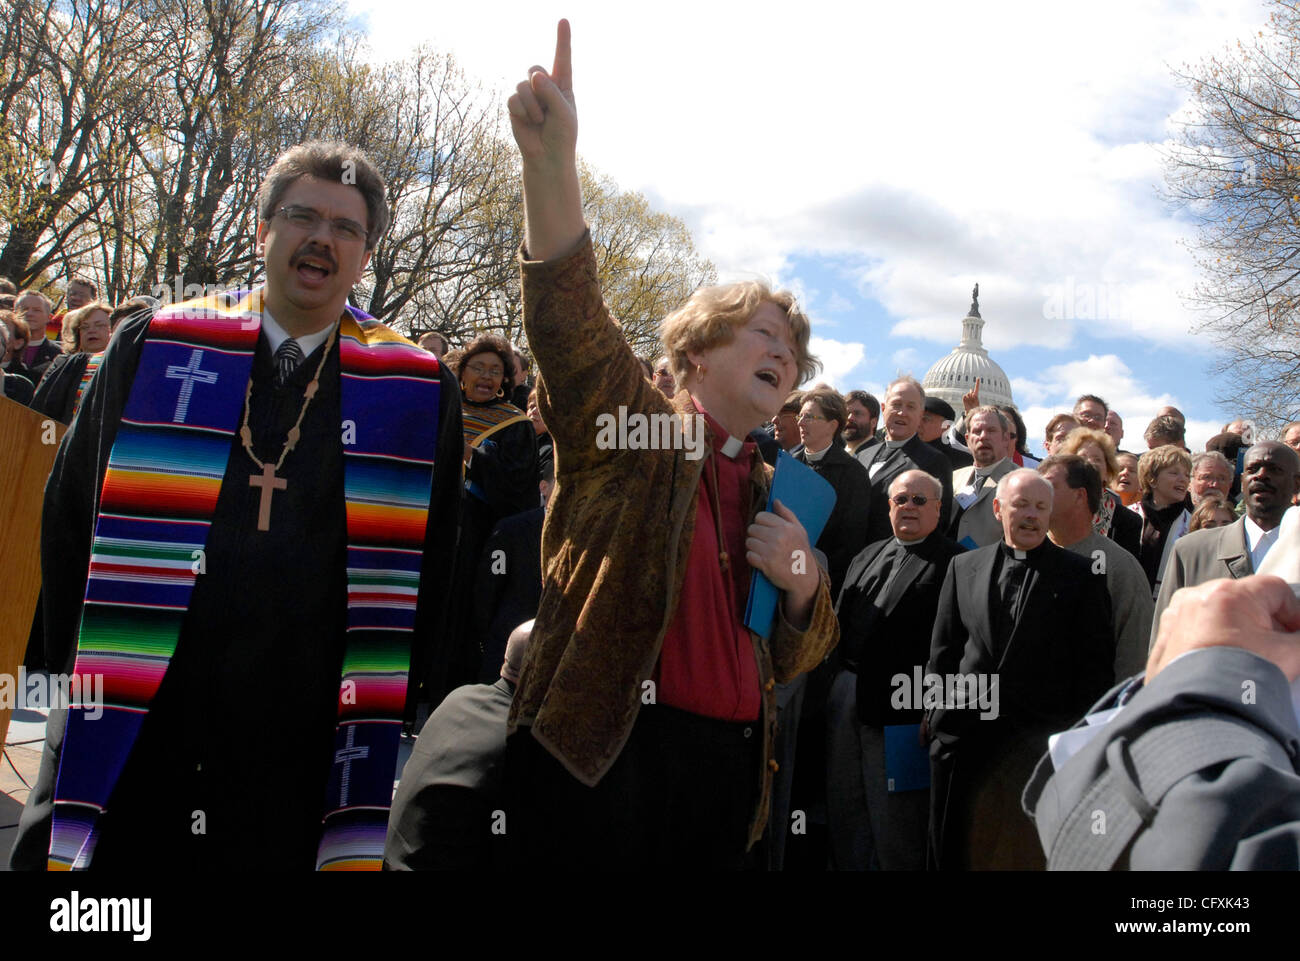 Apr 17, 2007 - Washington, DC, USA - Dr. MIGUEL DE LA TORRE and Rev. ERIN SWENSON join over 220 other religious leaders from around the United States near the Capitol to express support for anti-discrimination legislation, including the Matthew Shepard hate crime bill, being considered in Congress.  Stock Photo